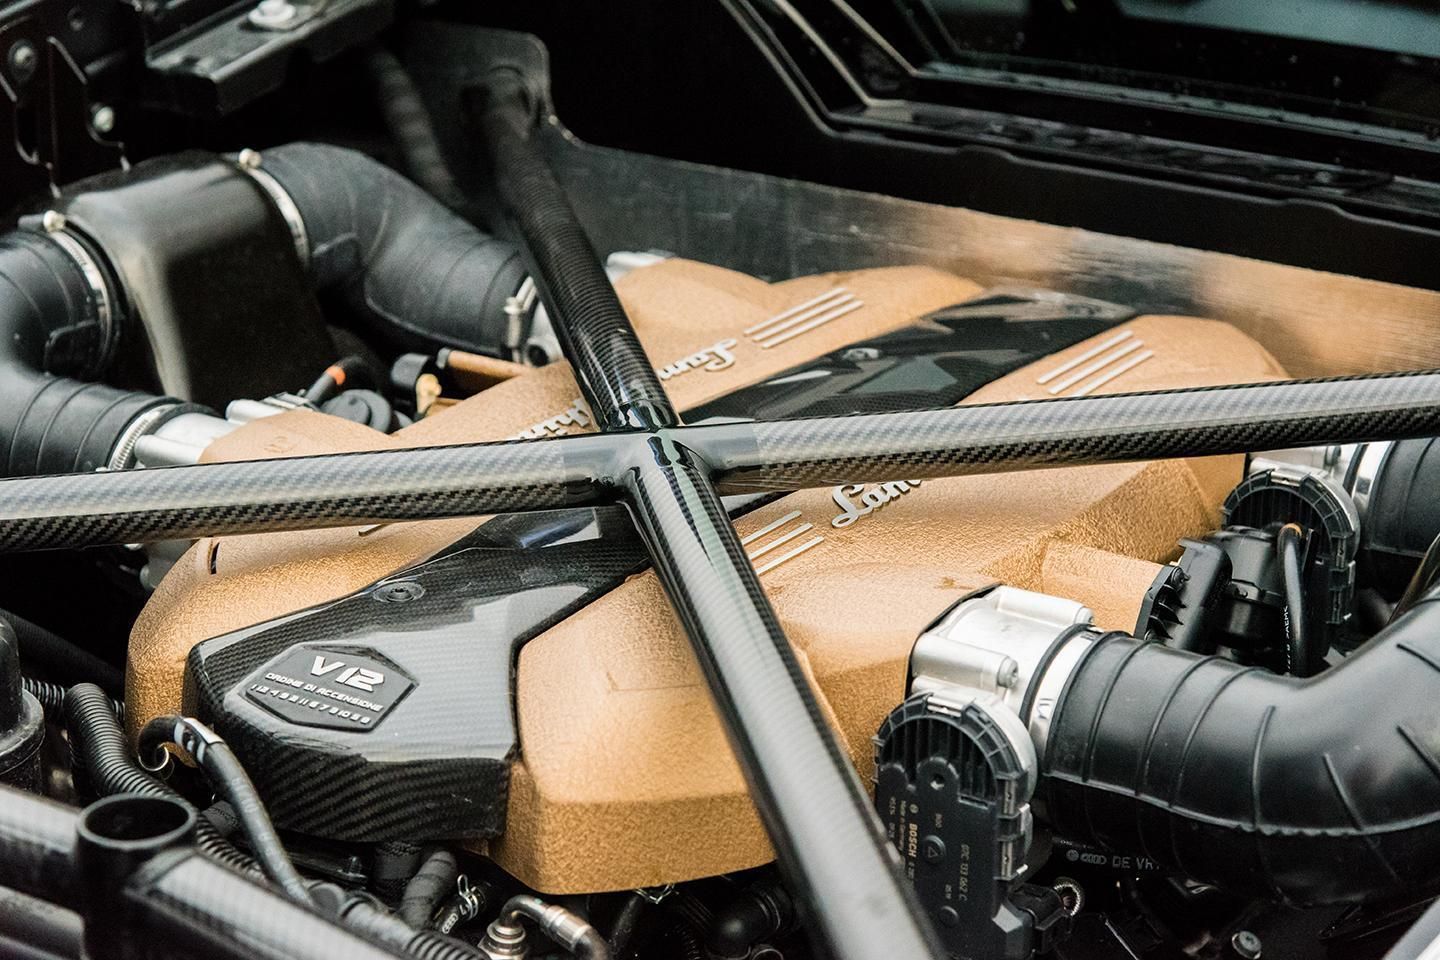 The very soul of our car' - Lambo V12 stays | PistonHeads UK